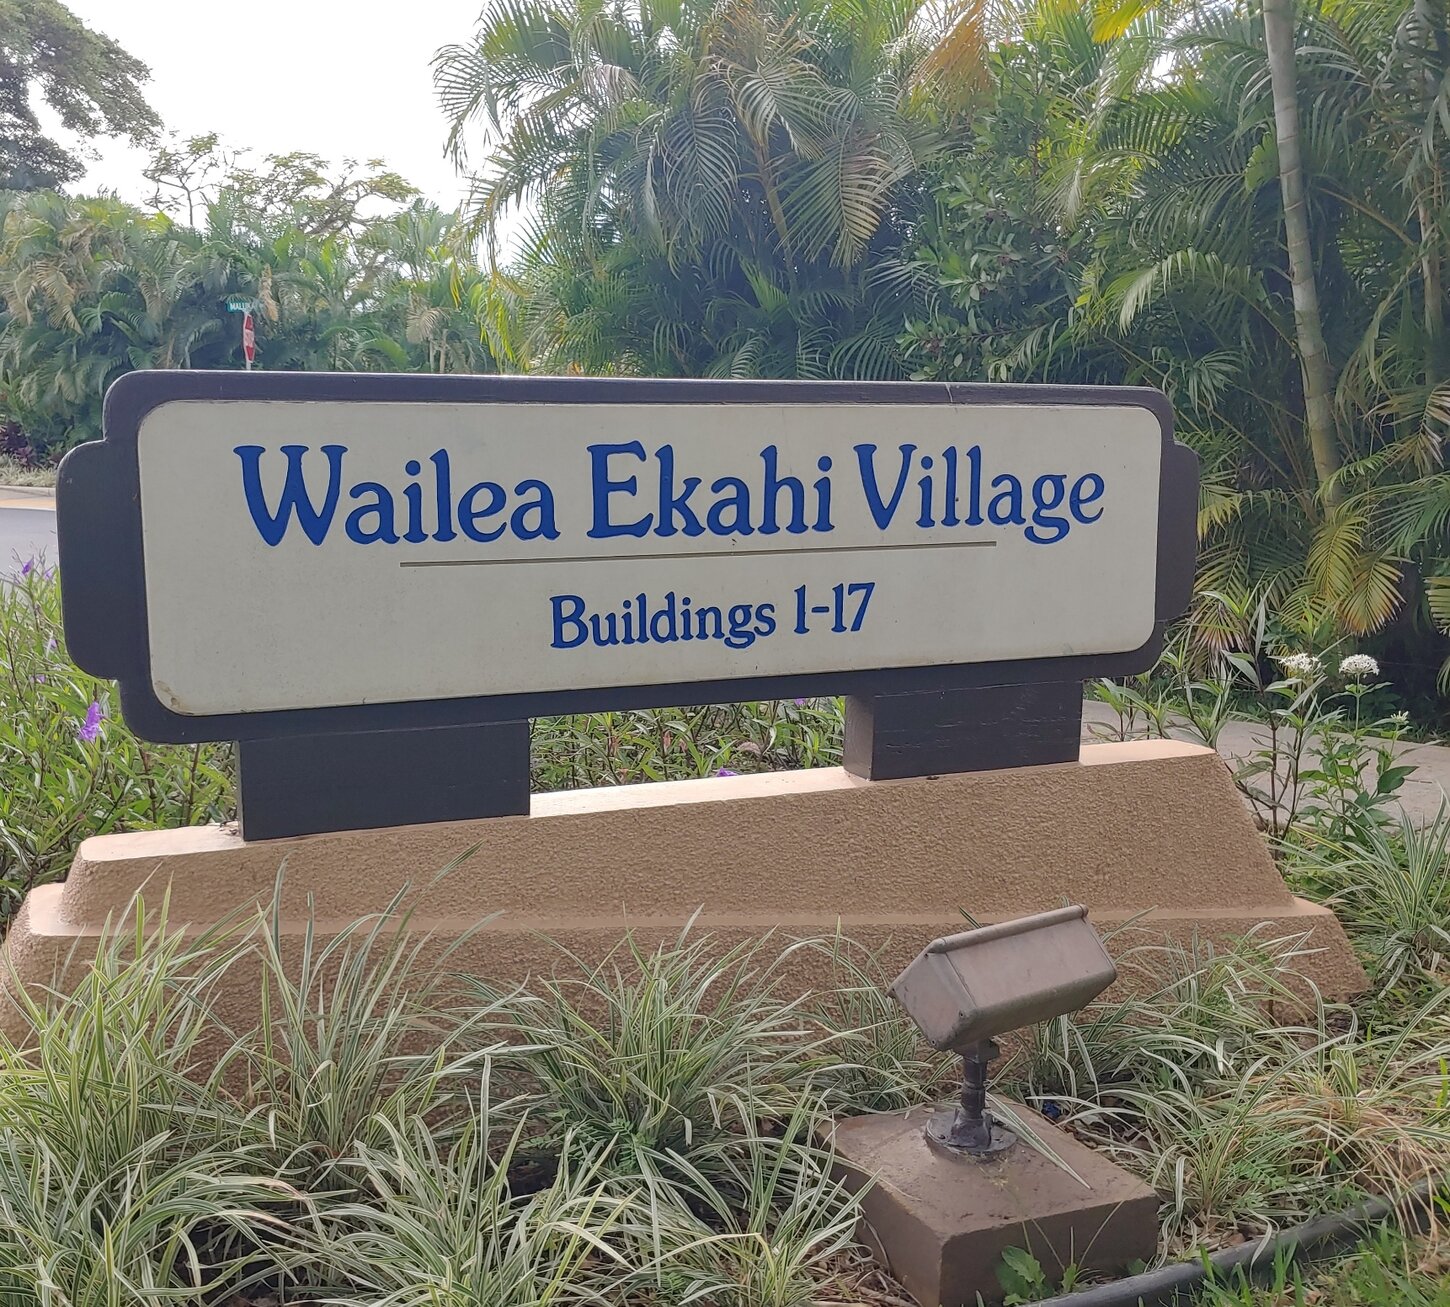 There are 4 driveways into Ekahi Village; look for this entrance sign.